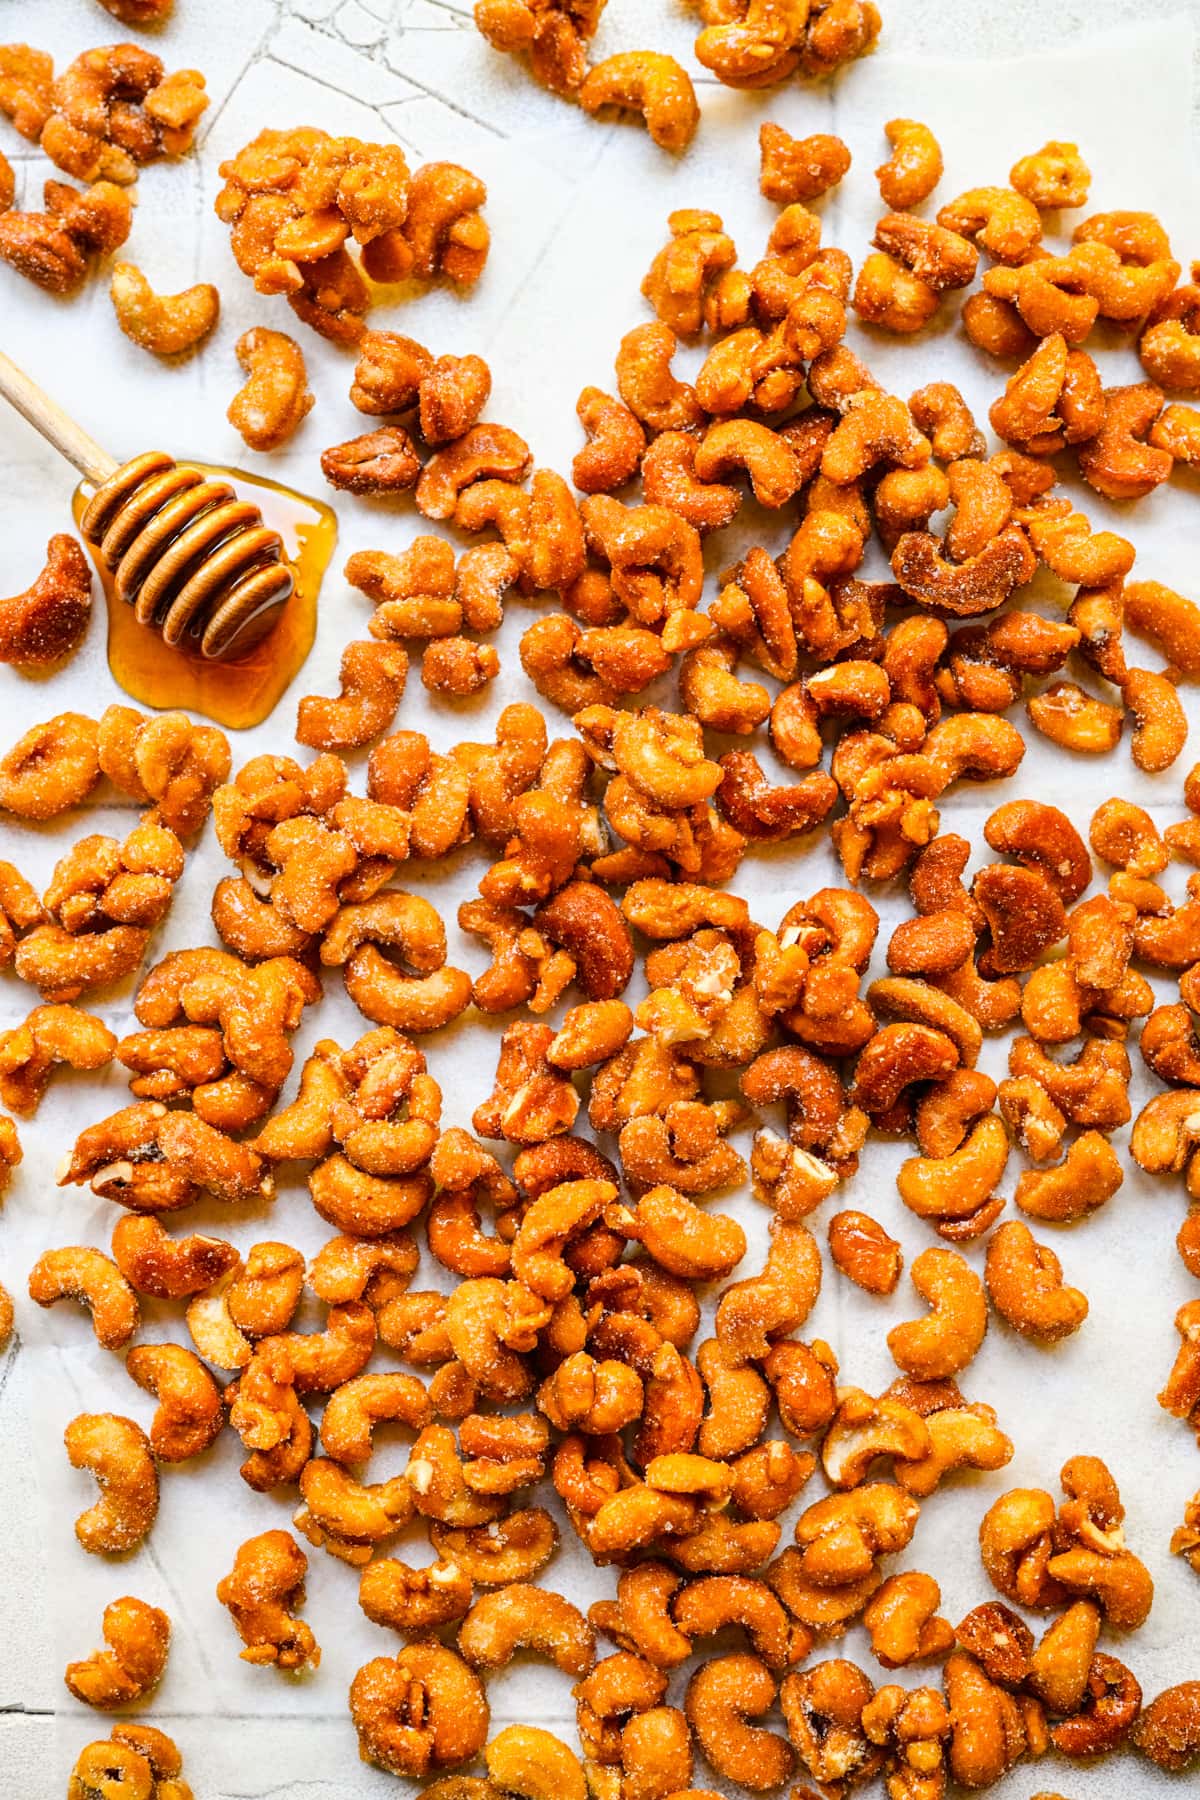 Overhead view of honey roasted cashews on a white background.